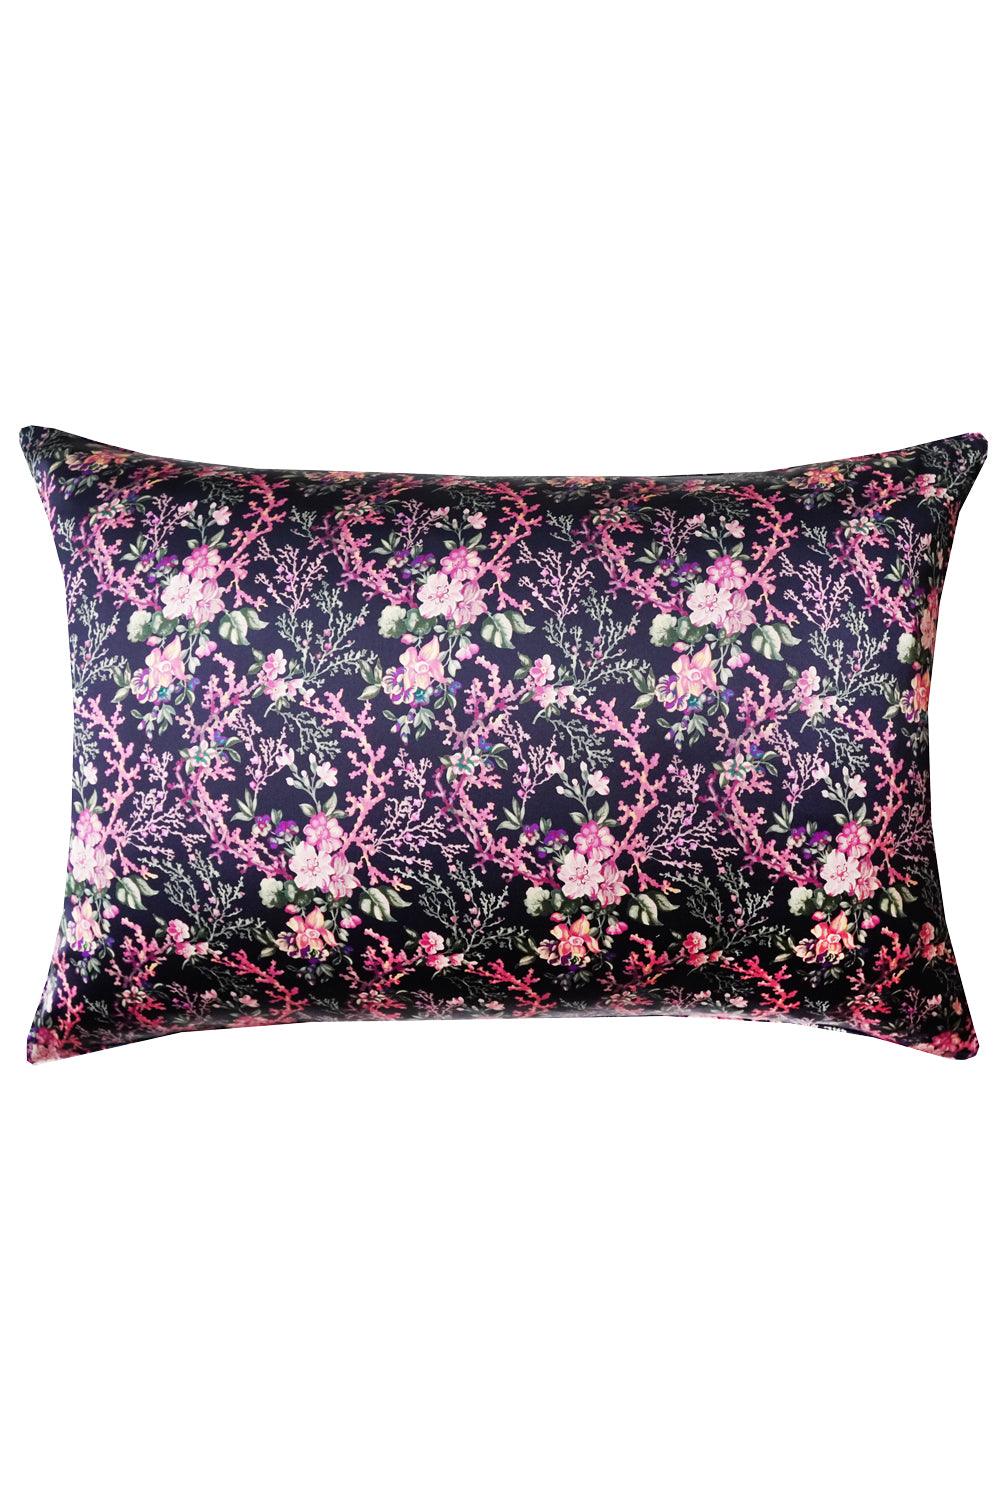 Silk Pillowcase made with Liberty Fabric CORAL MEADOW - Coco & Wolf